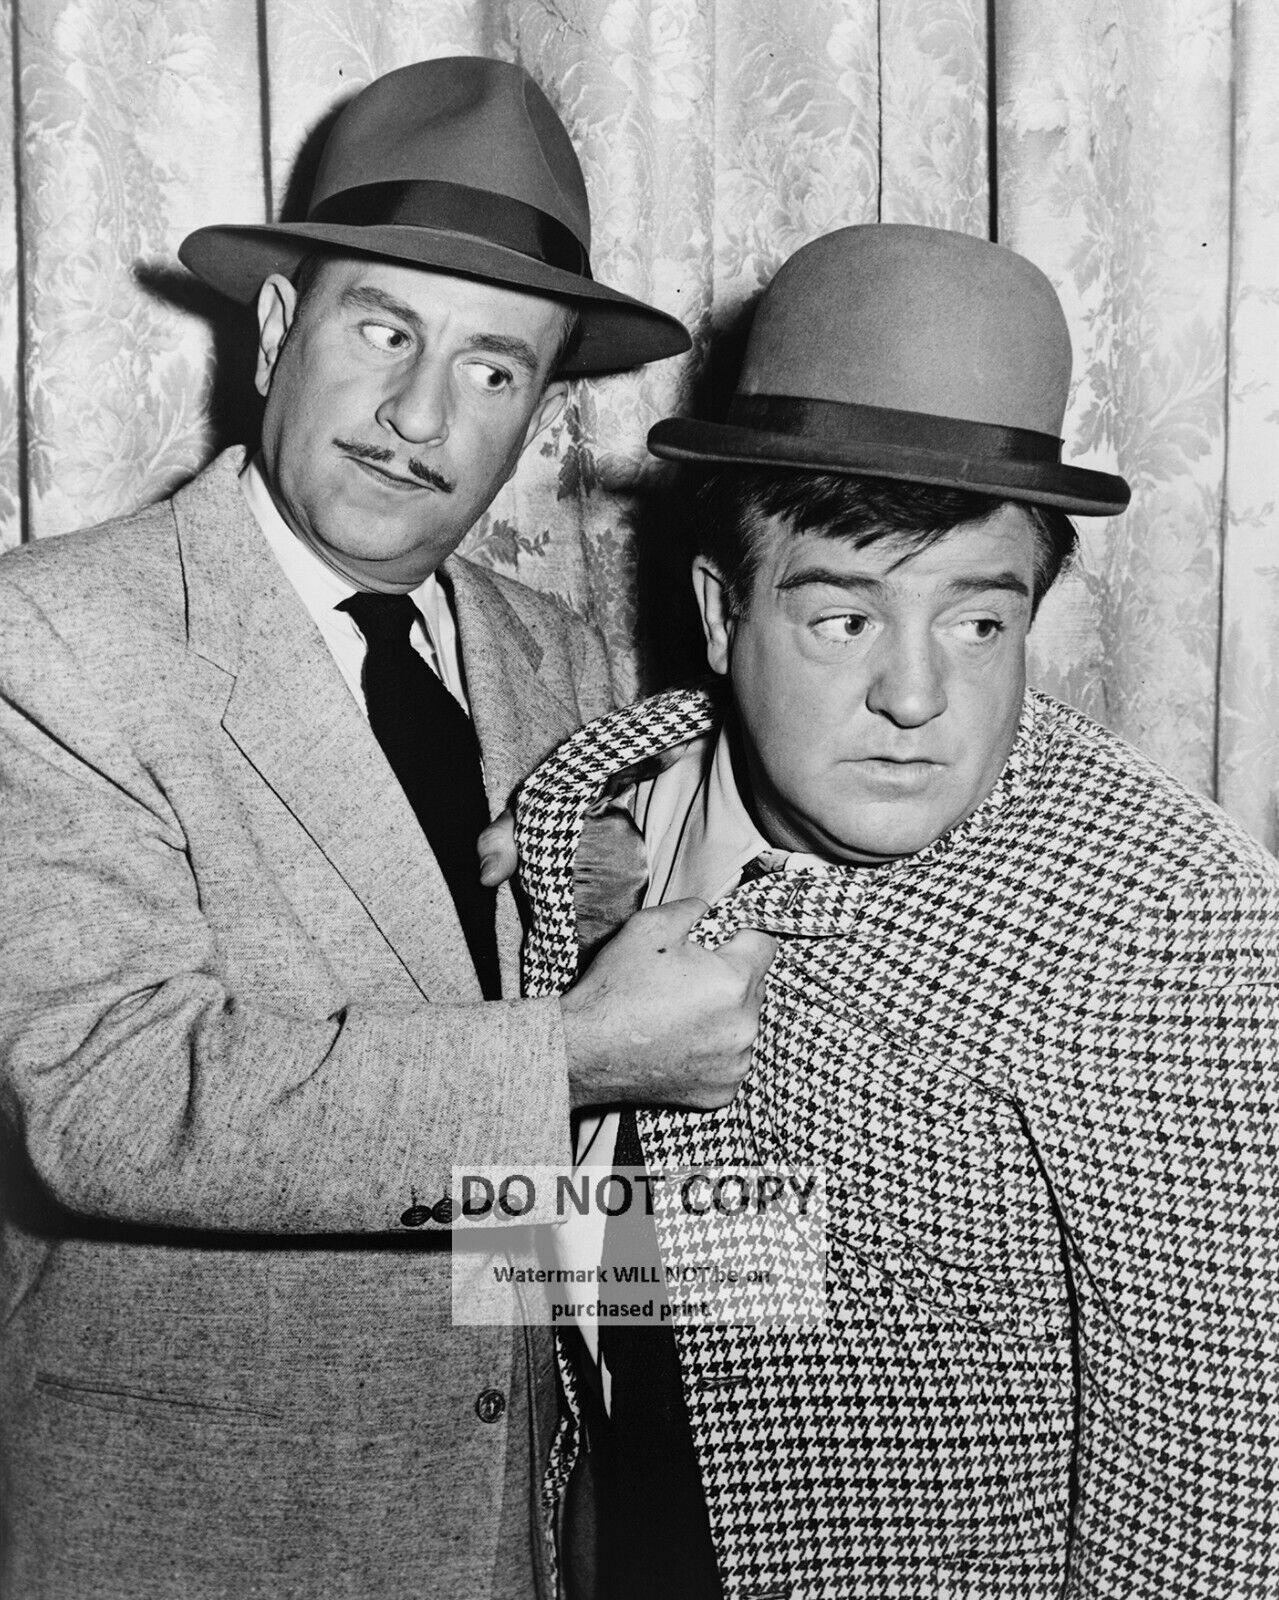 BUD ABBOTT AND LOU COSTELLO IN 1952 - 8X10 PUBLICITY PHOTO (AB-209)